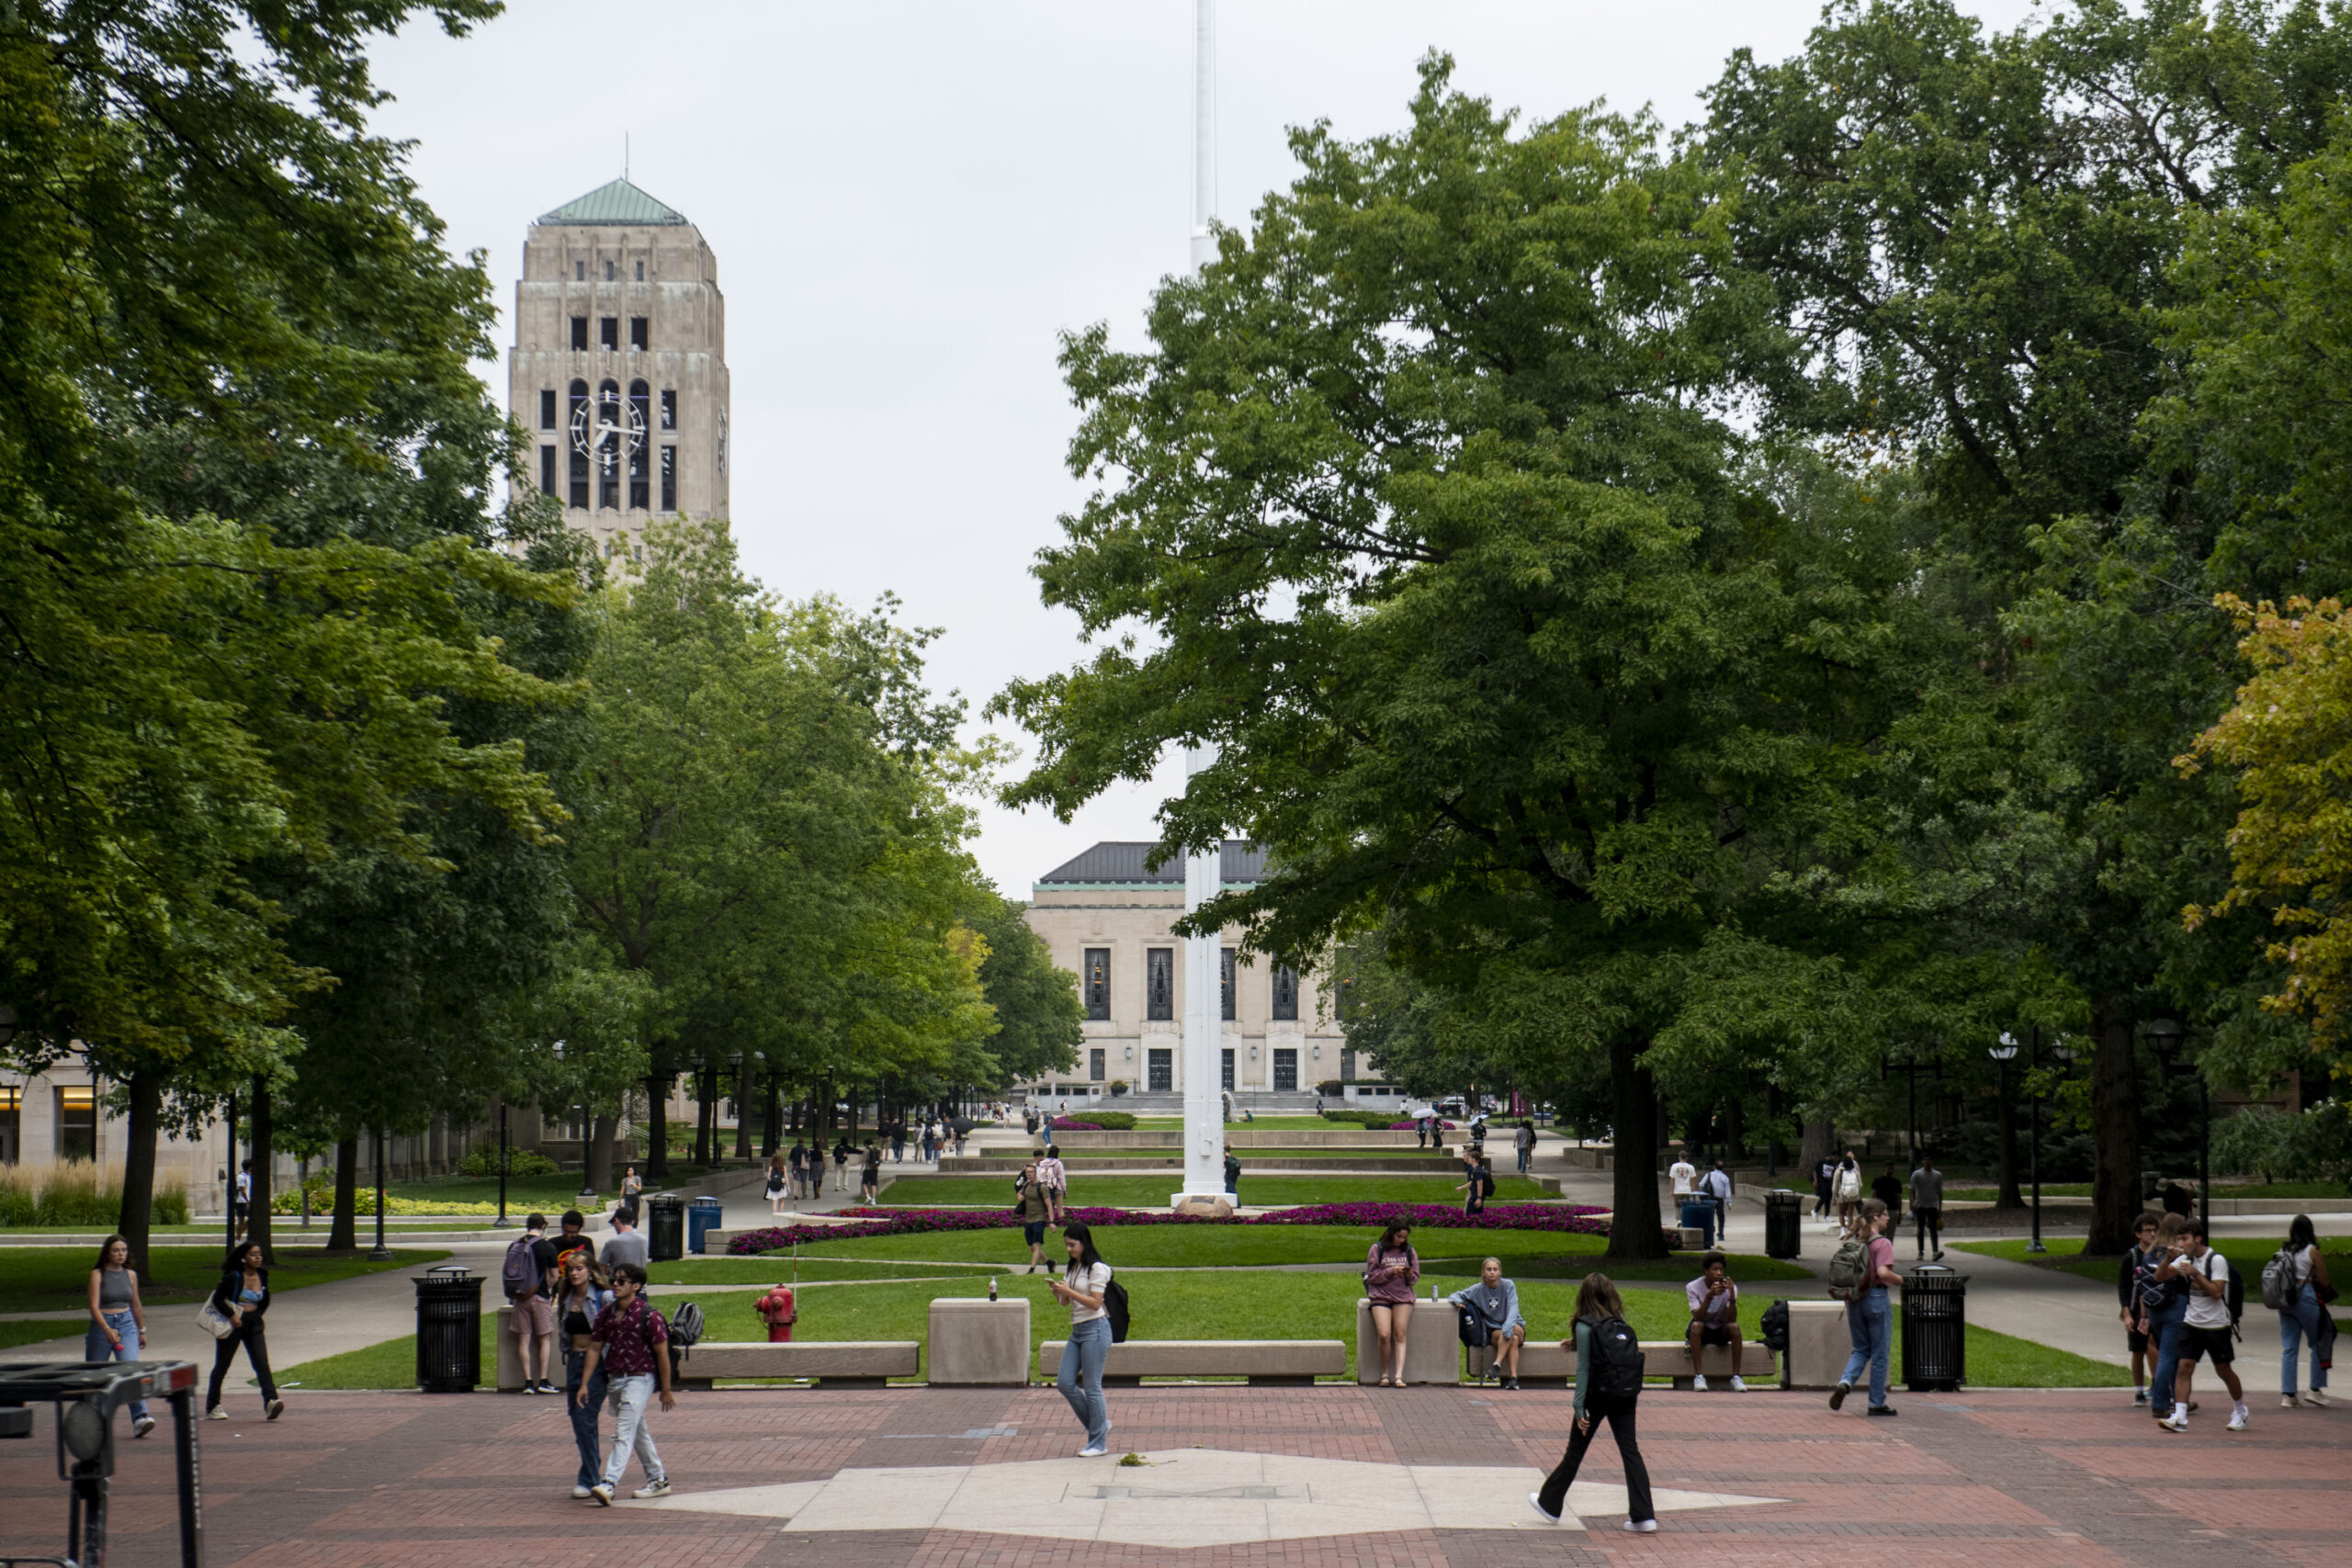 A third party gained access to the University of Michigan's systems, leading to an Internet outage in August